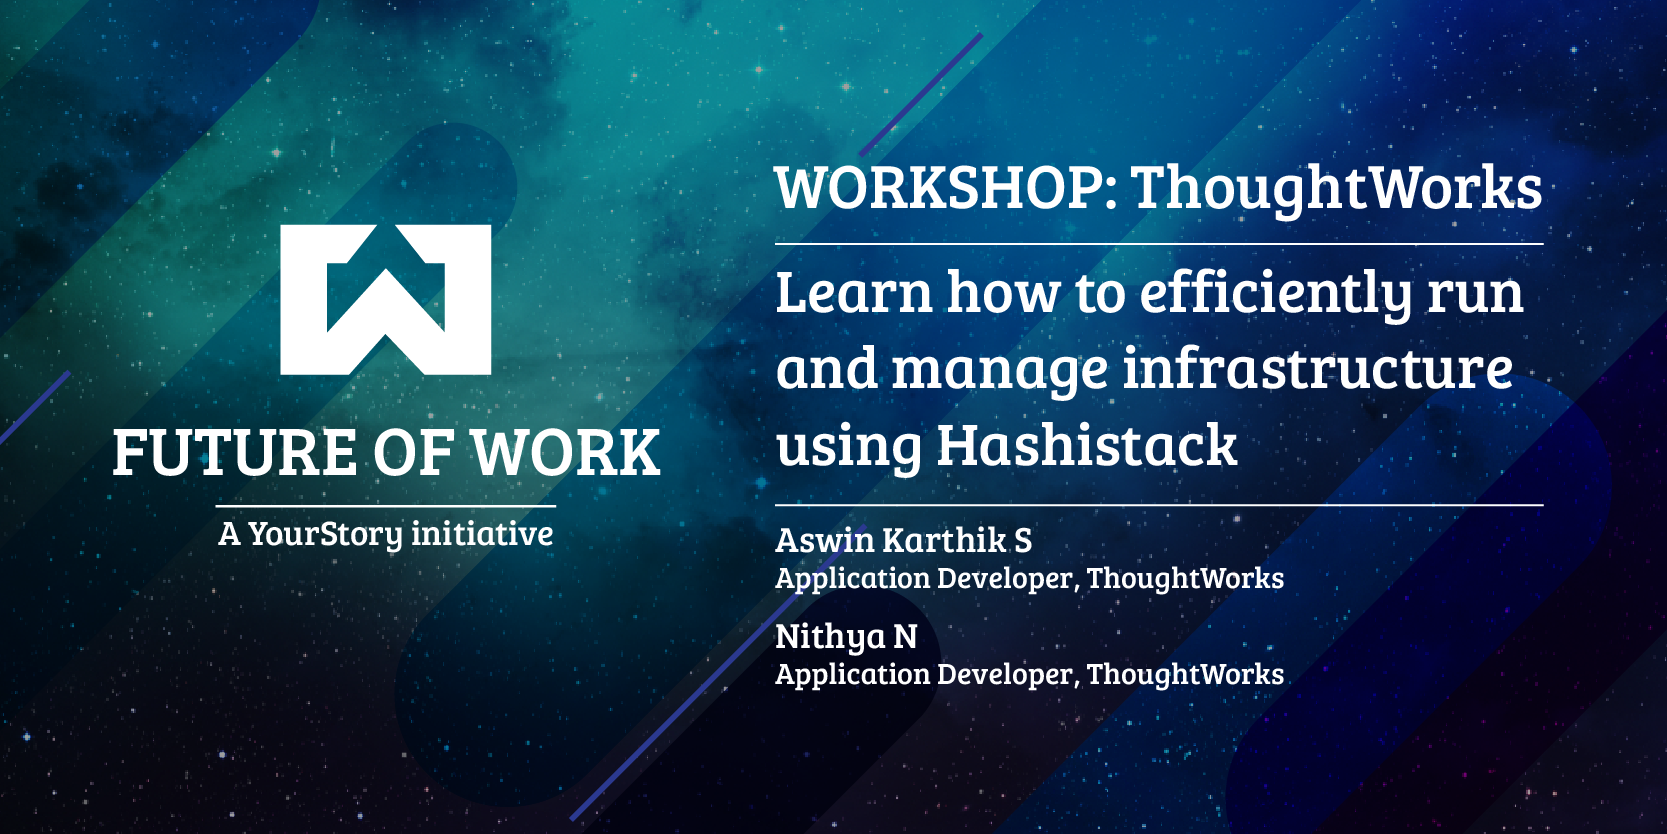 Learn how to efficiently run and manage infrastructure using Hashistack, at workshop by ThoughtWorks